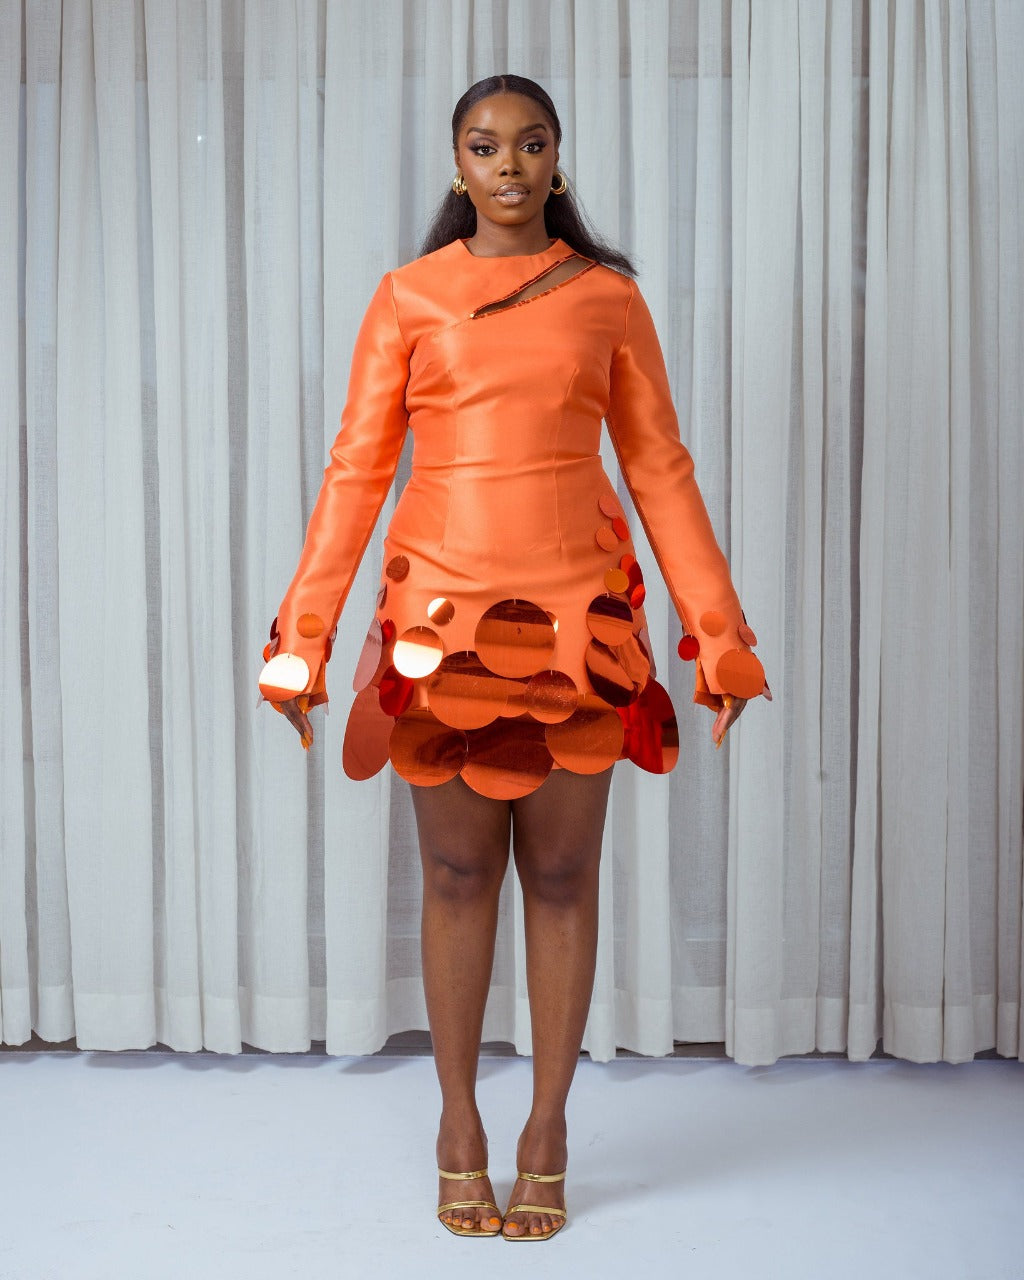 A model wearing an Orange mini dress with side cut-out detail at the neckline and embellished with sequins at the hem and sleeves in front of white curtains